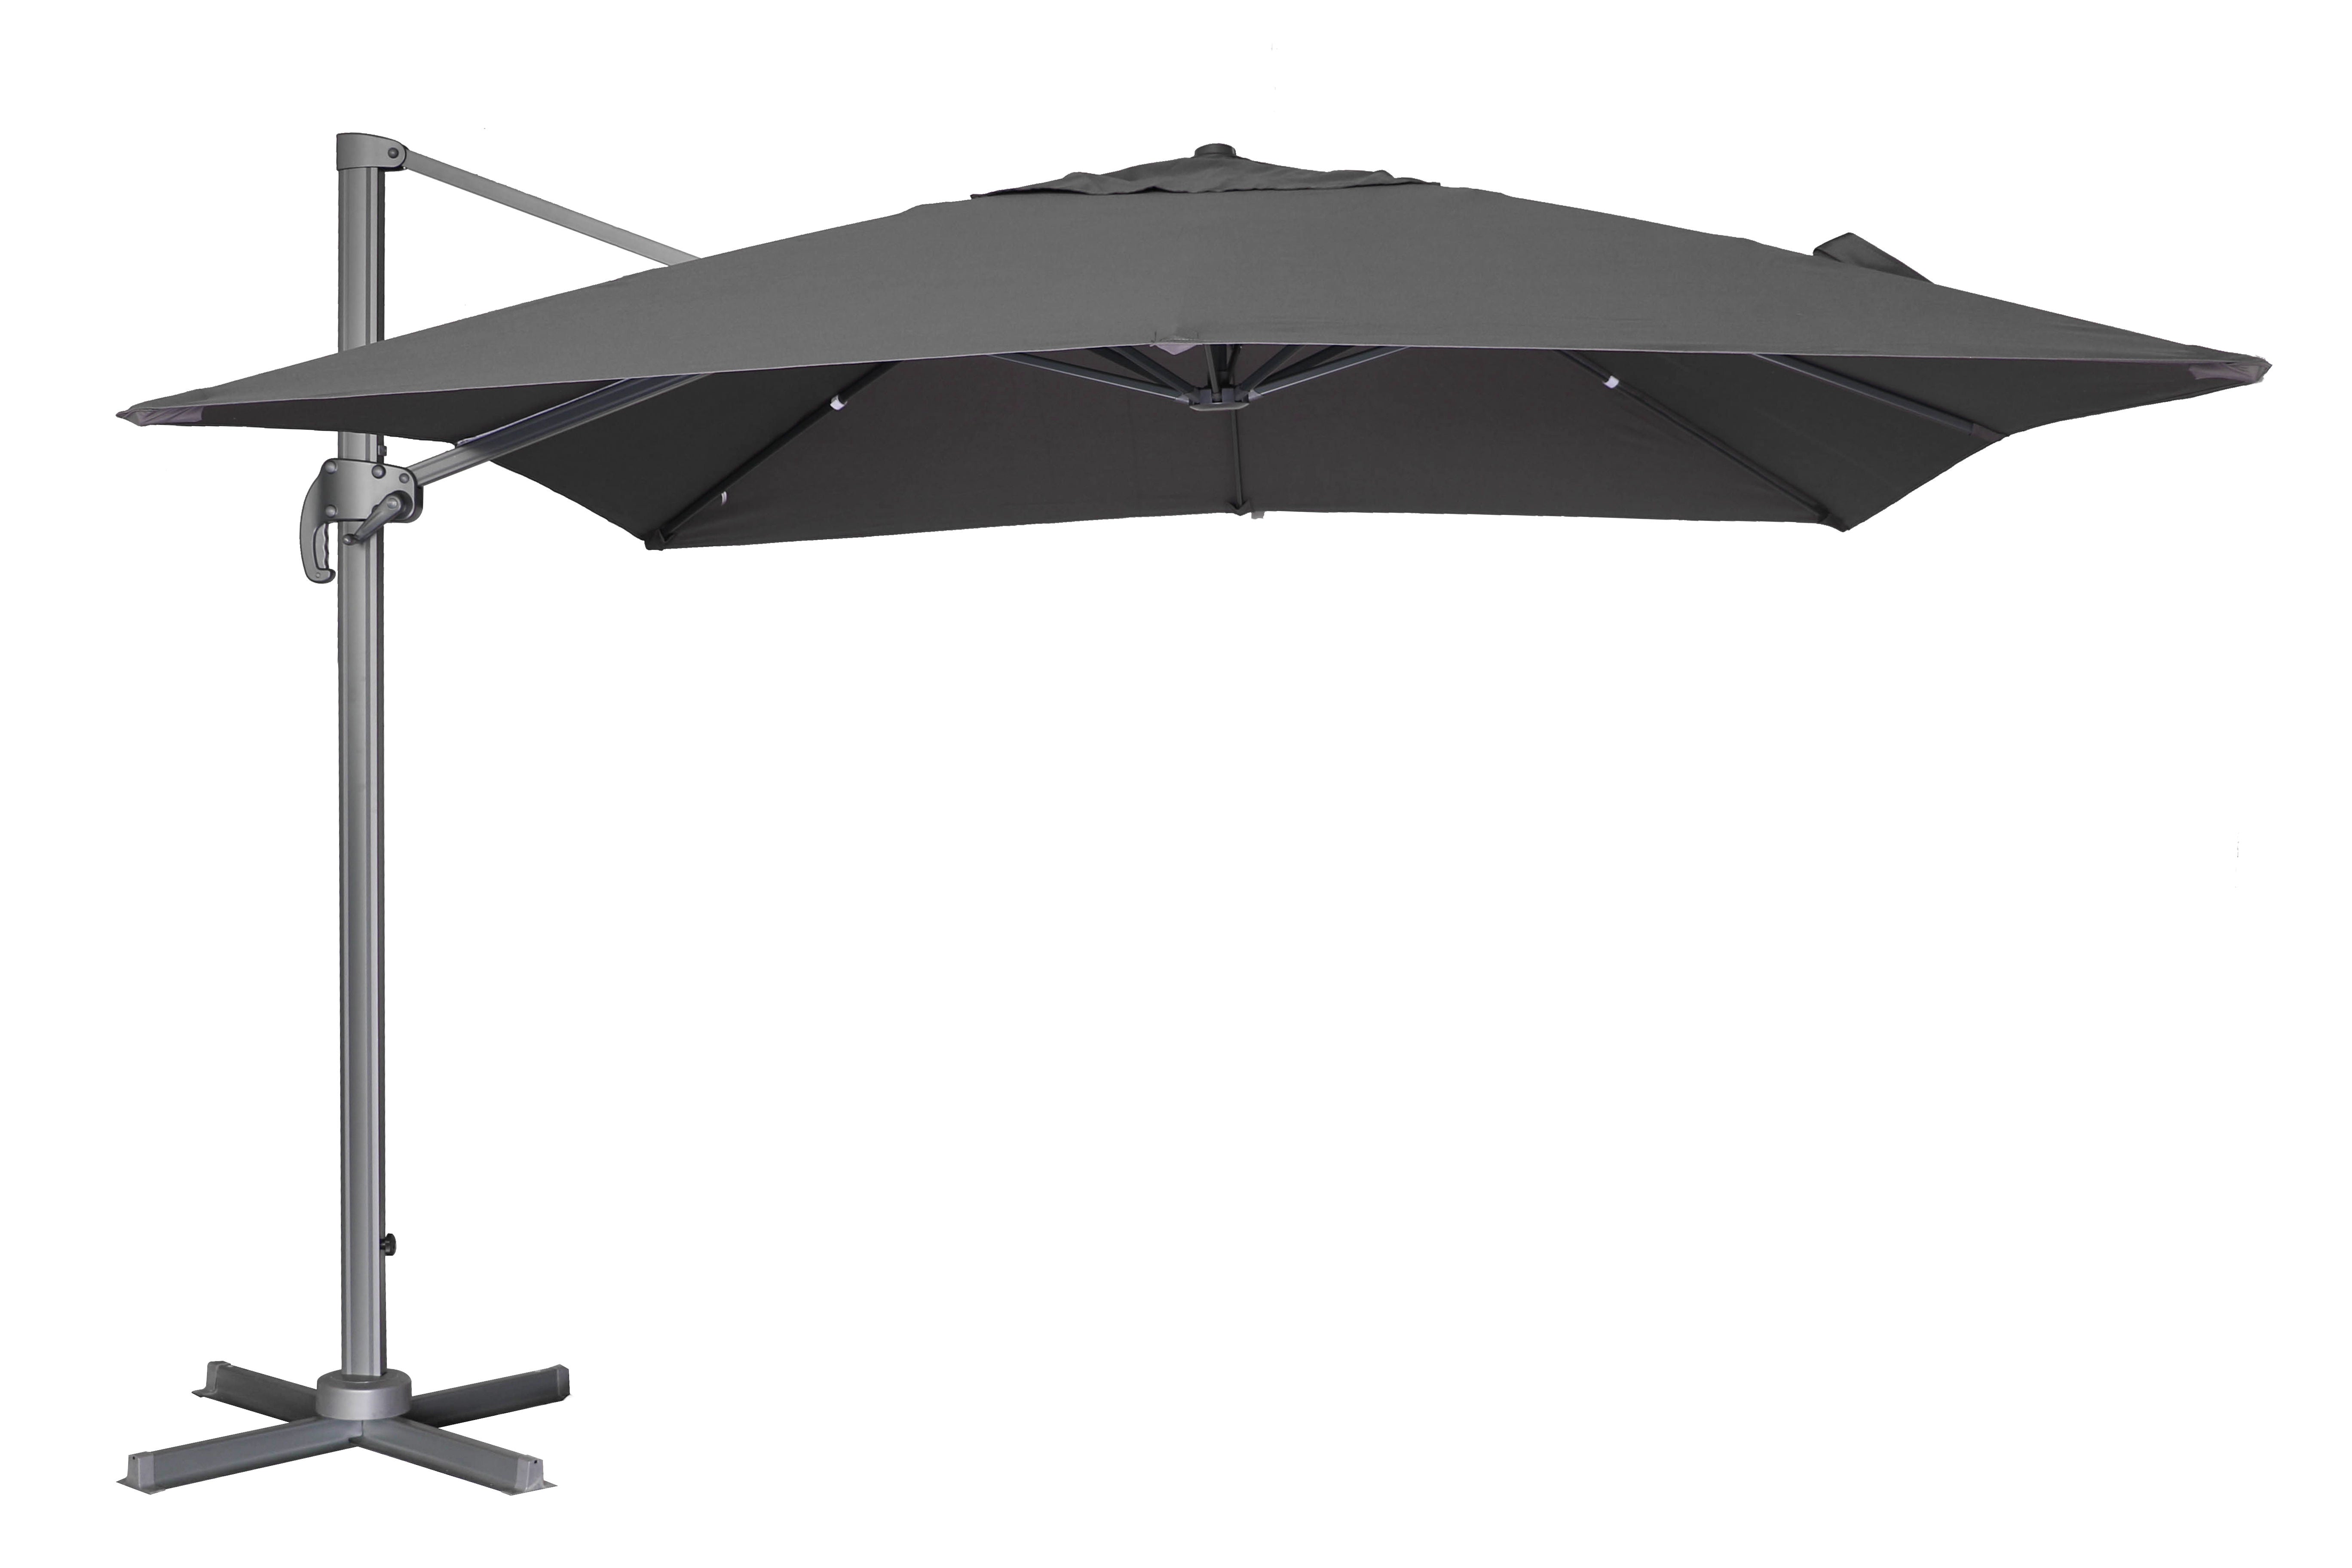 PatioZone 11' Tilting Rotating Luxury Offset Umbrella (Cover Incl.) in UV-Protected Polyester (MOSS-T1203C) - Charcoal